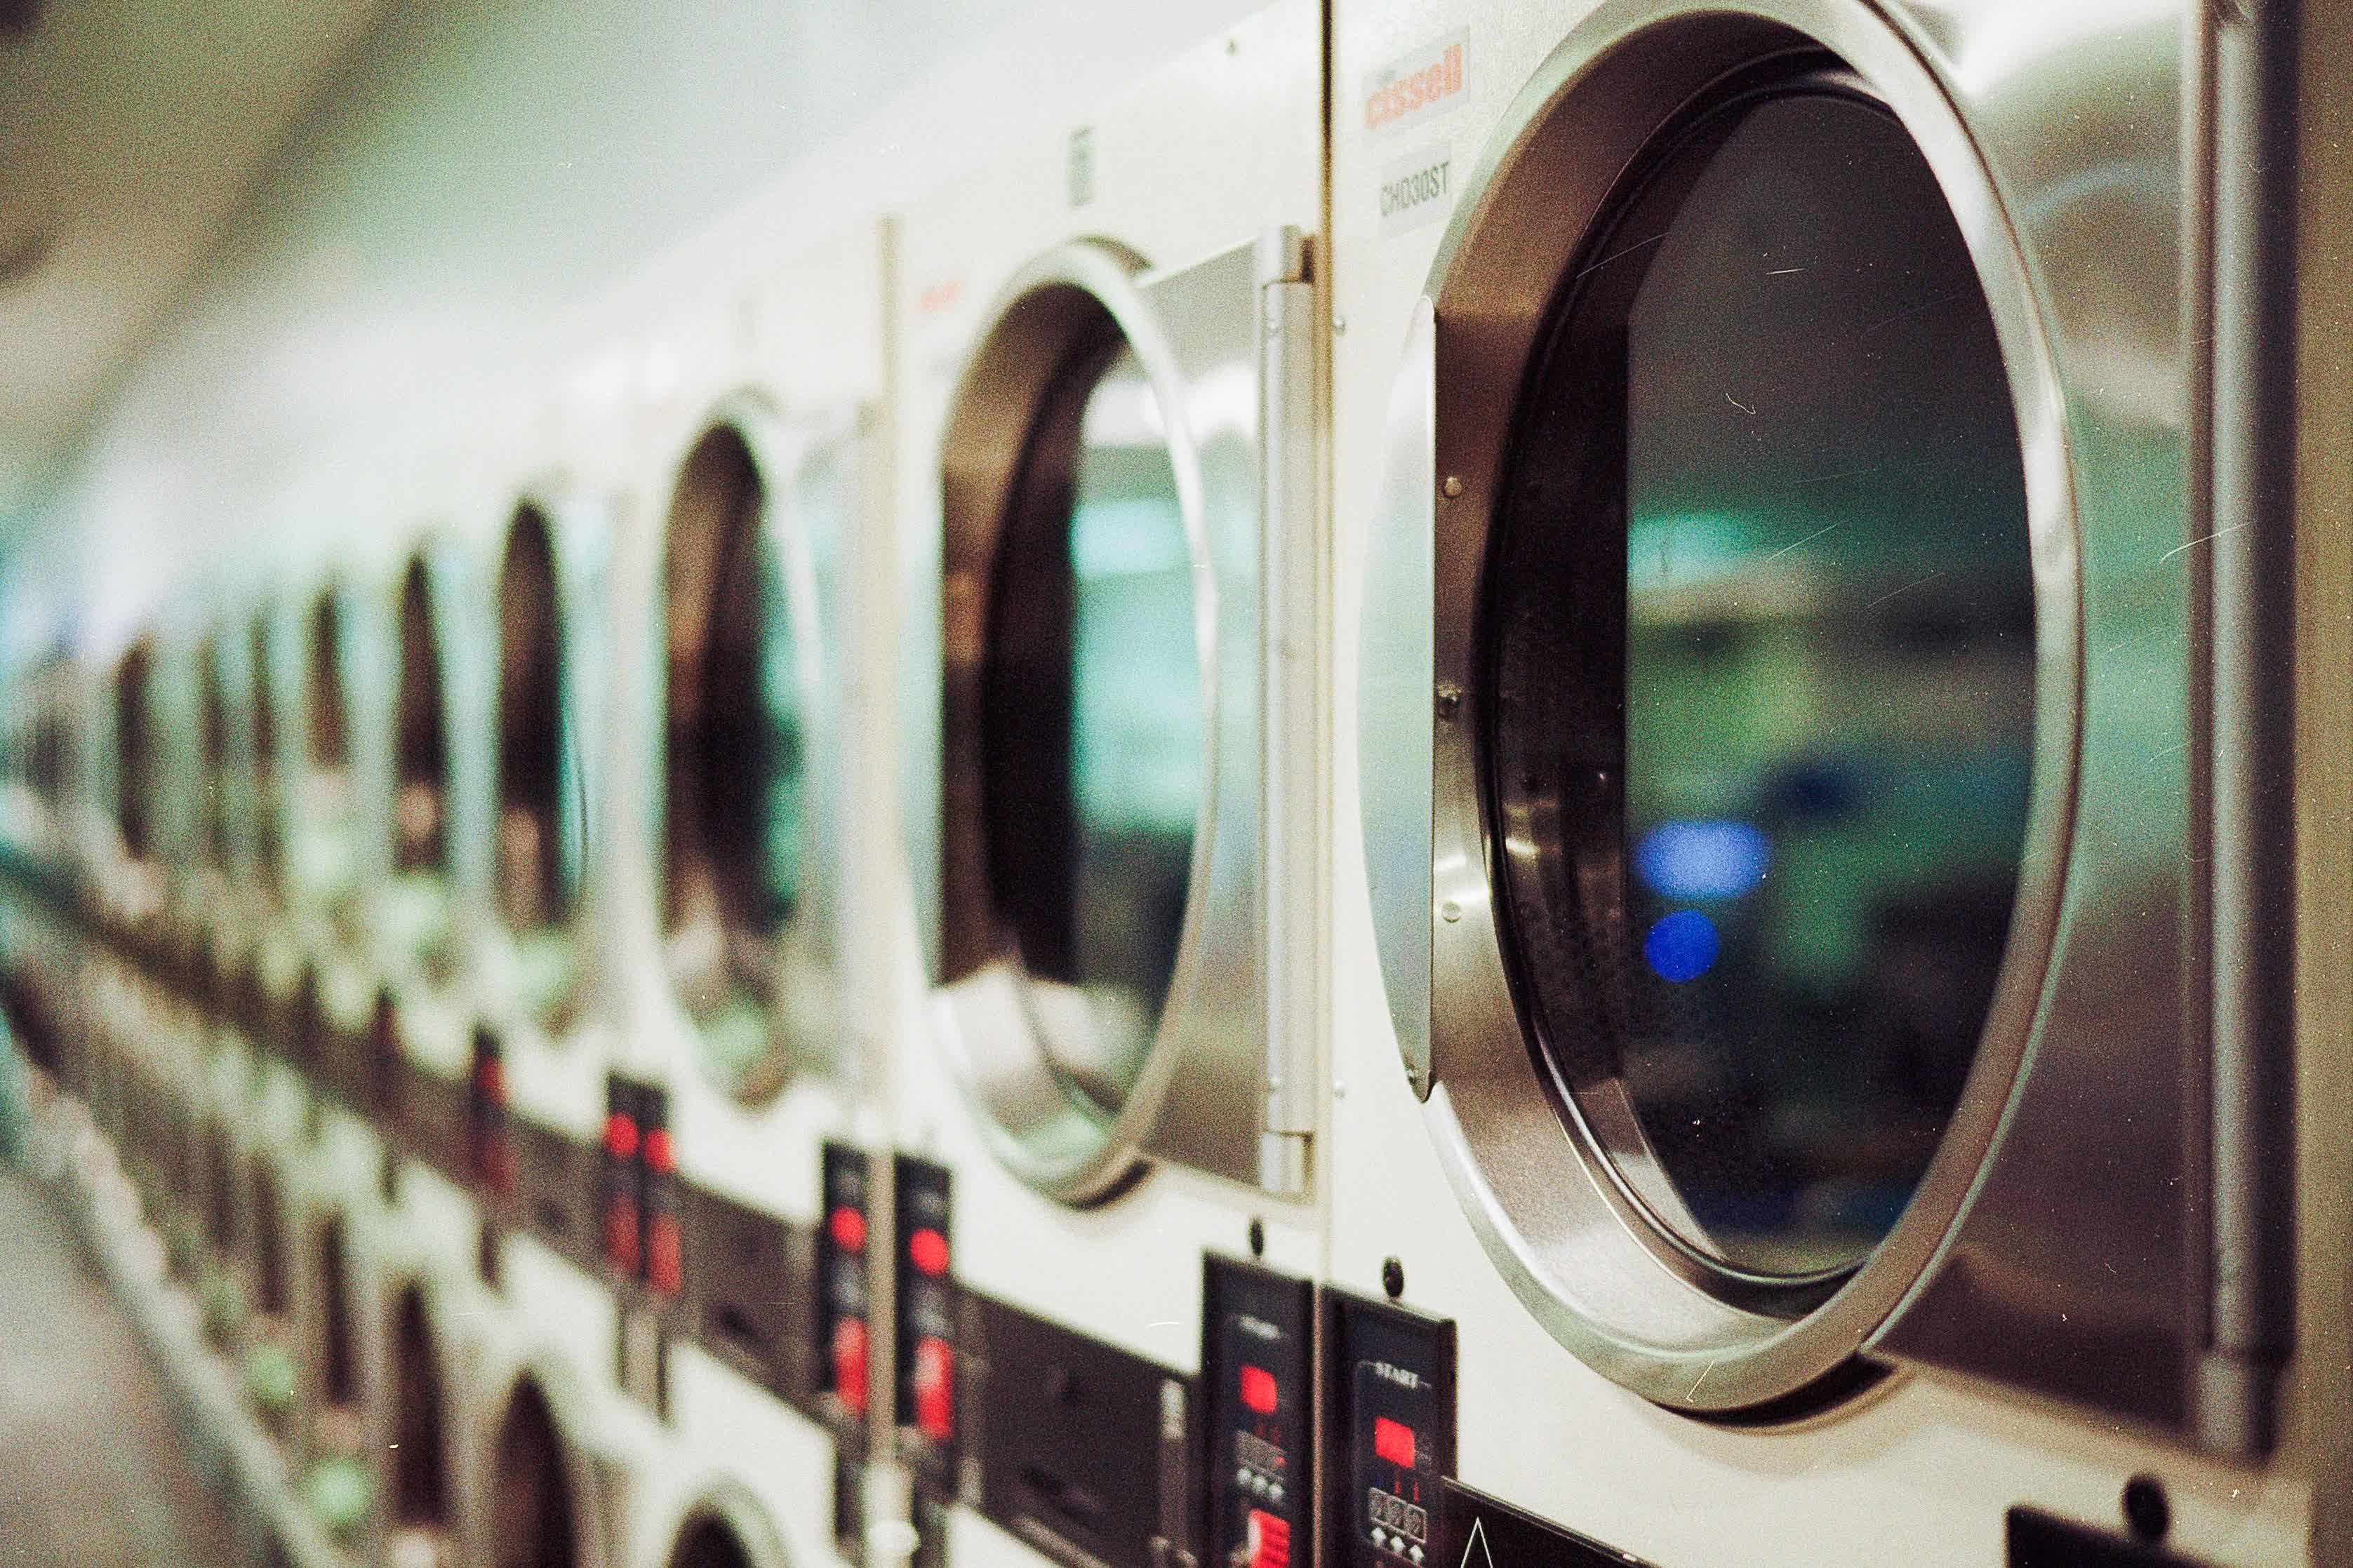 Silicon manufacturers are cannibalizing washing machines as chip shortage continues